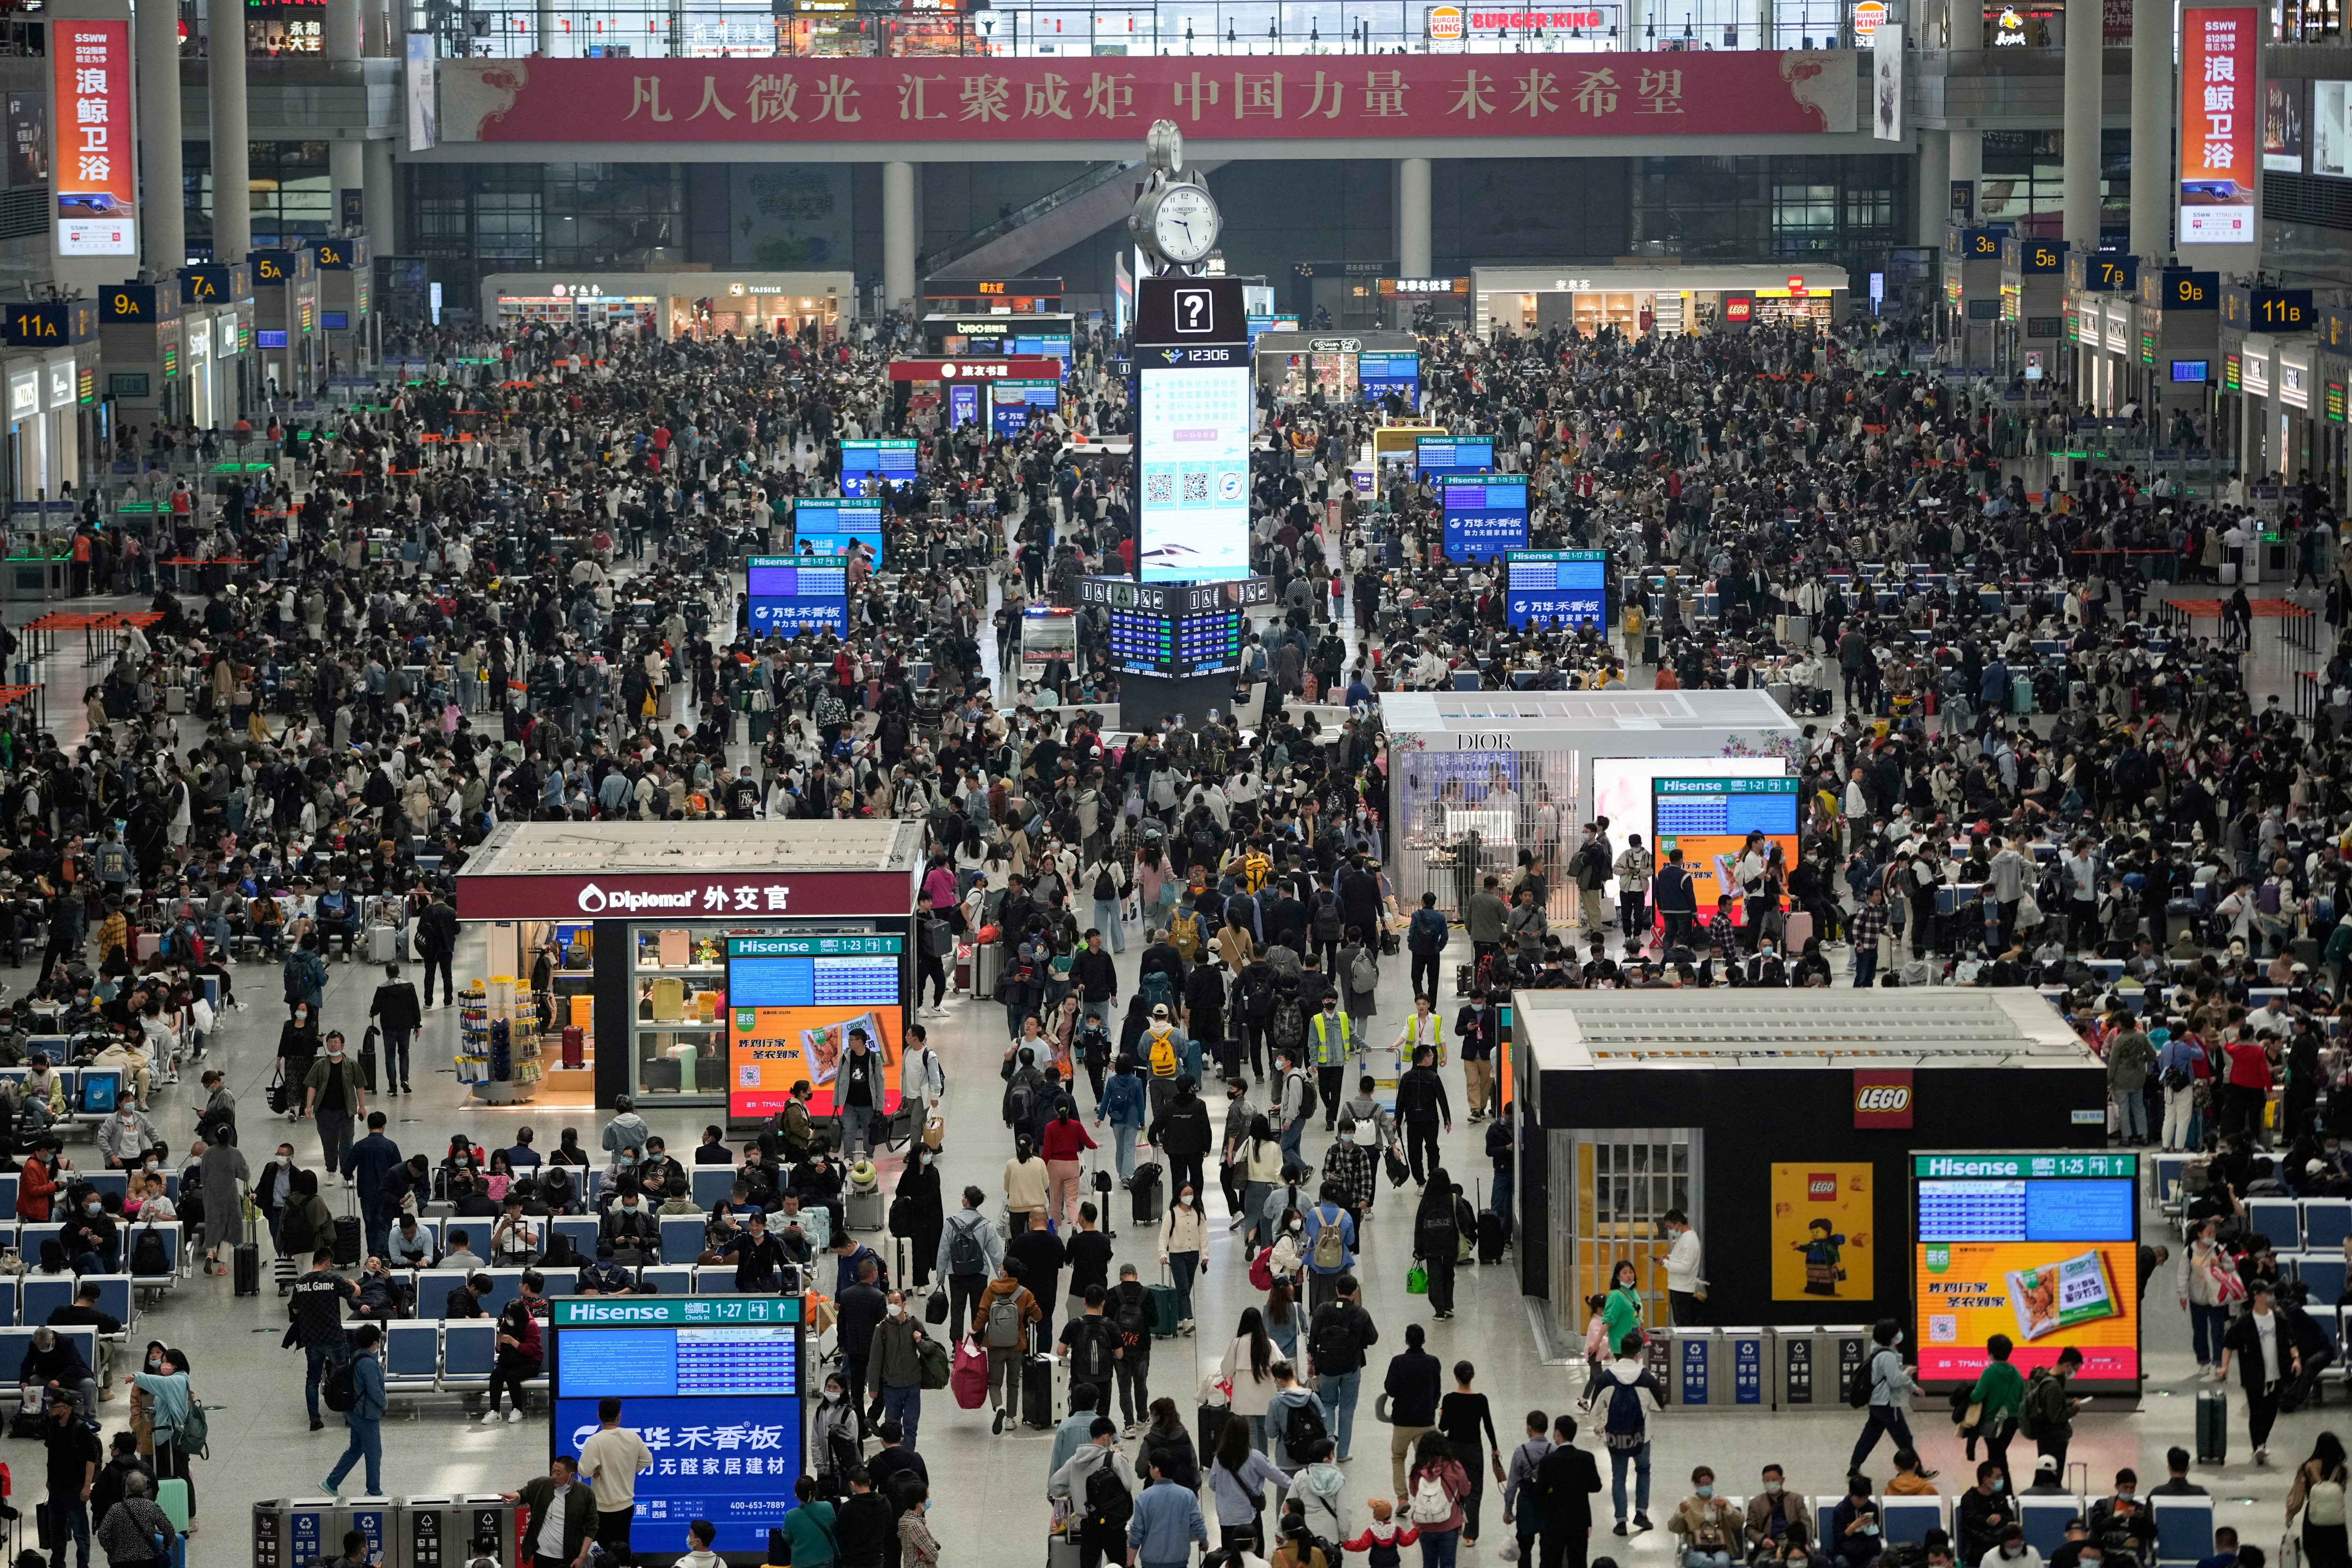 Passengers wait to board trains at Shanghai Hongqiao railway station ahead of the five-day Labour Day holiday, in Shanghai